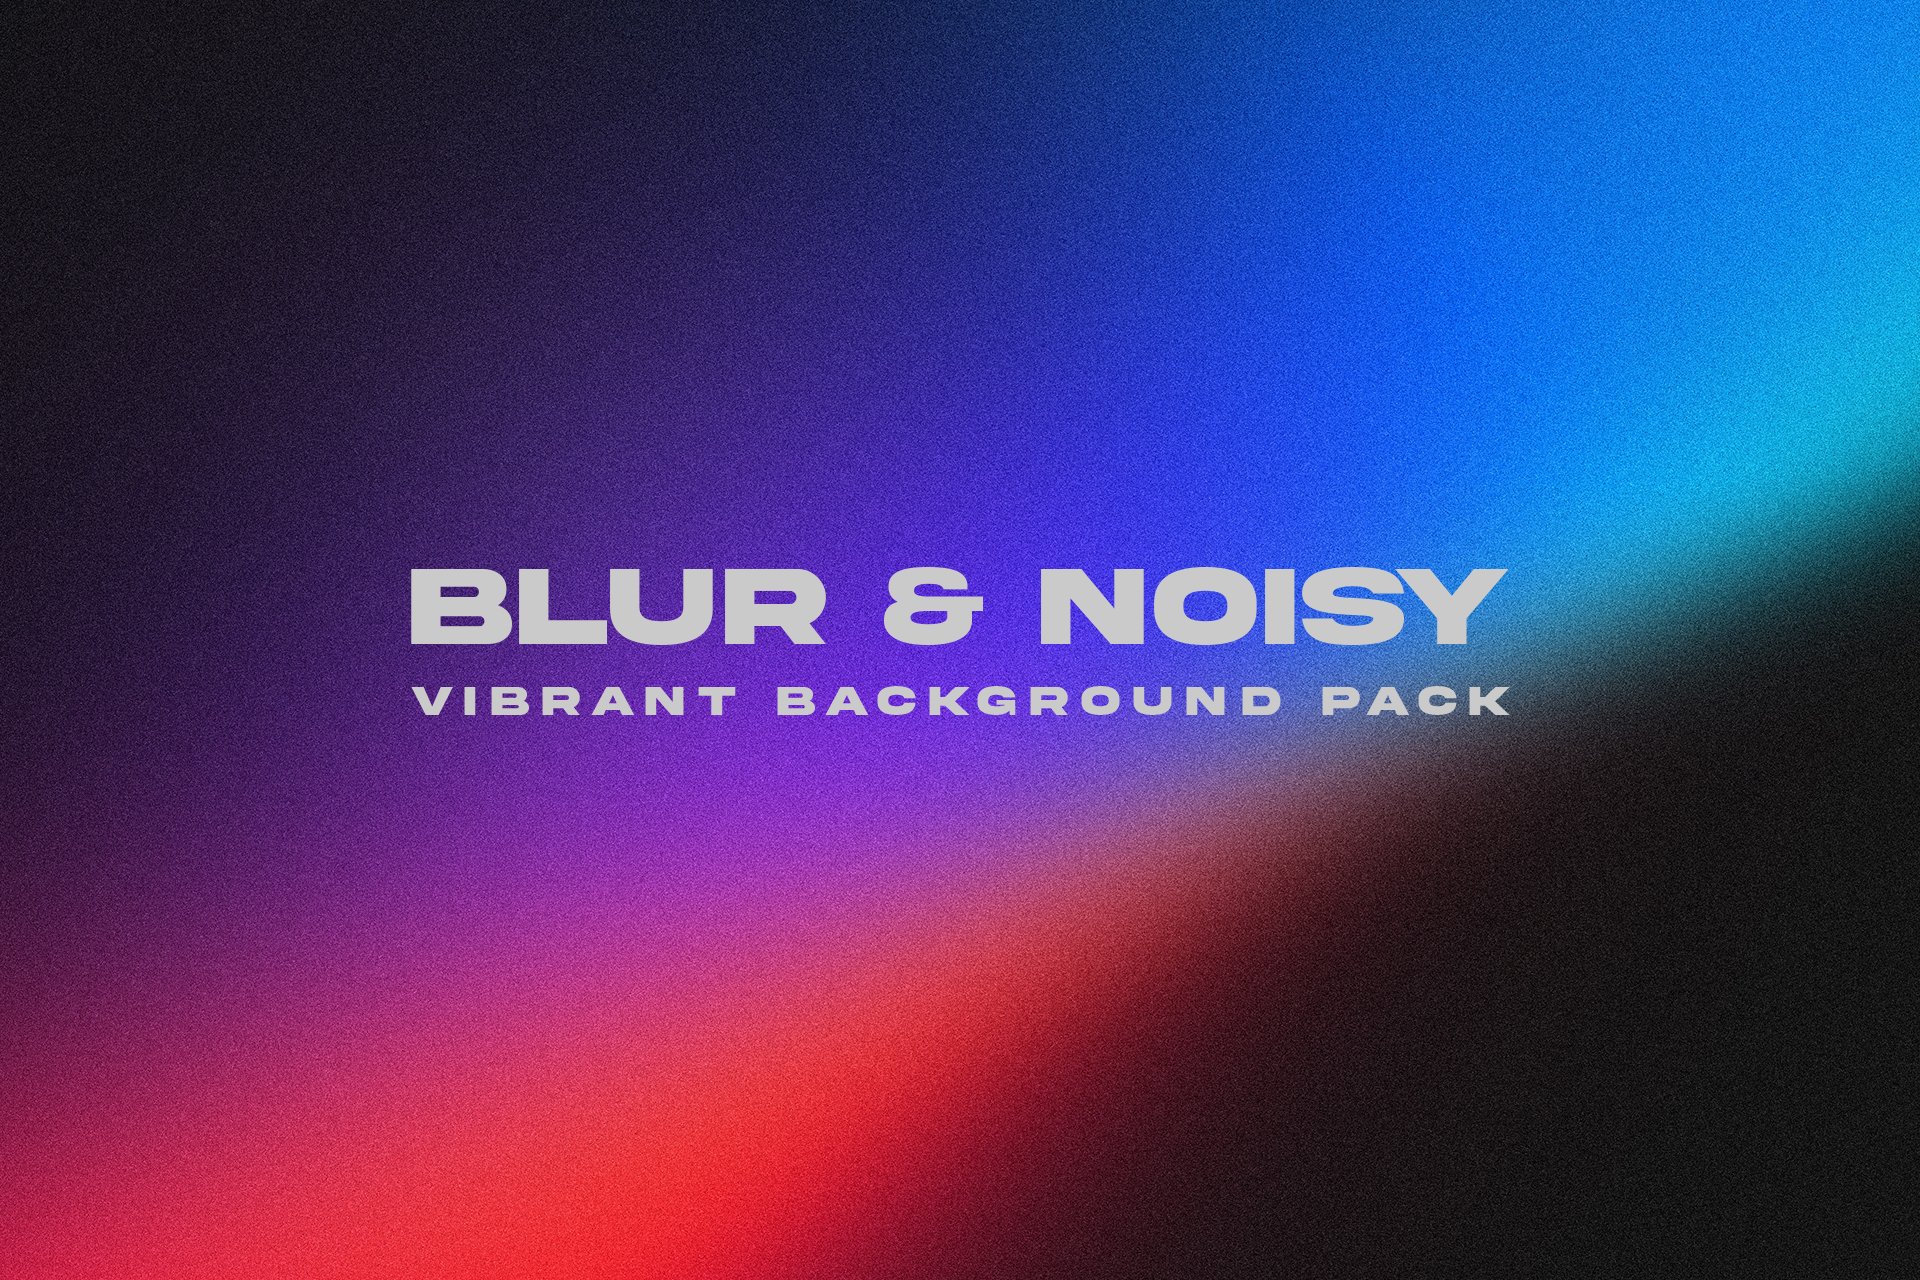 Blur & Noisy Vibrant Background Pack cover image.